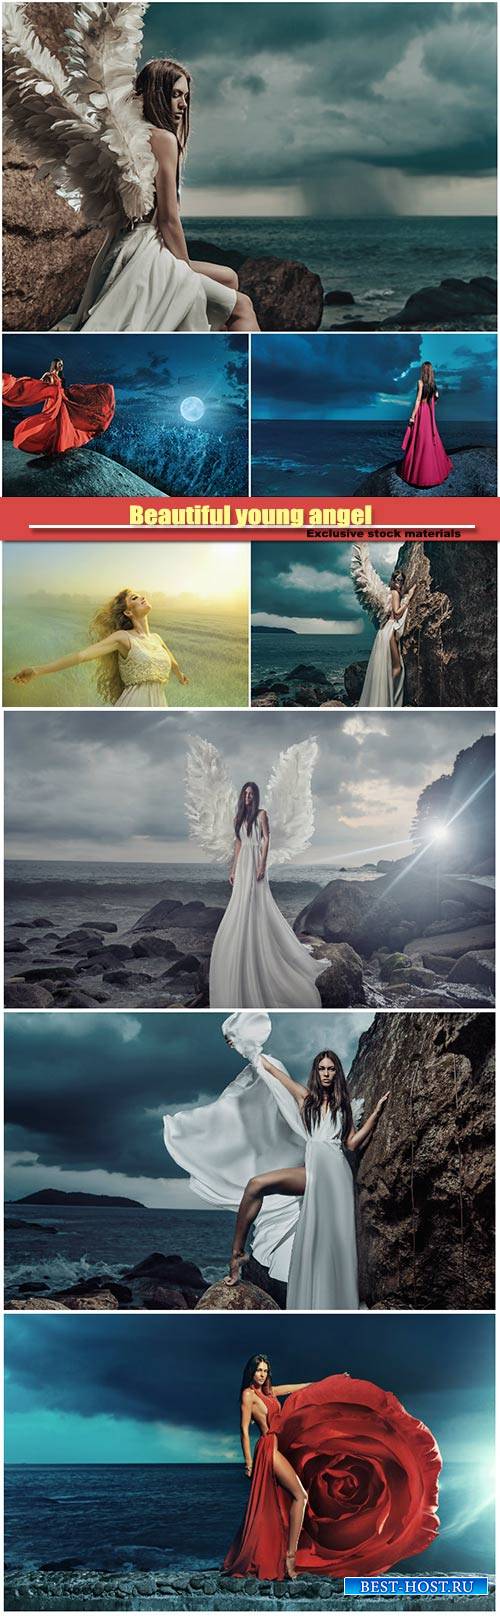 Beautiful young angel climbing on the cliff, lady looking at the storm on t ...